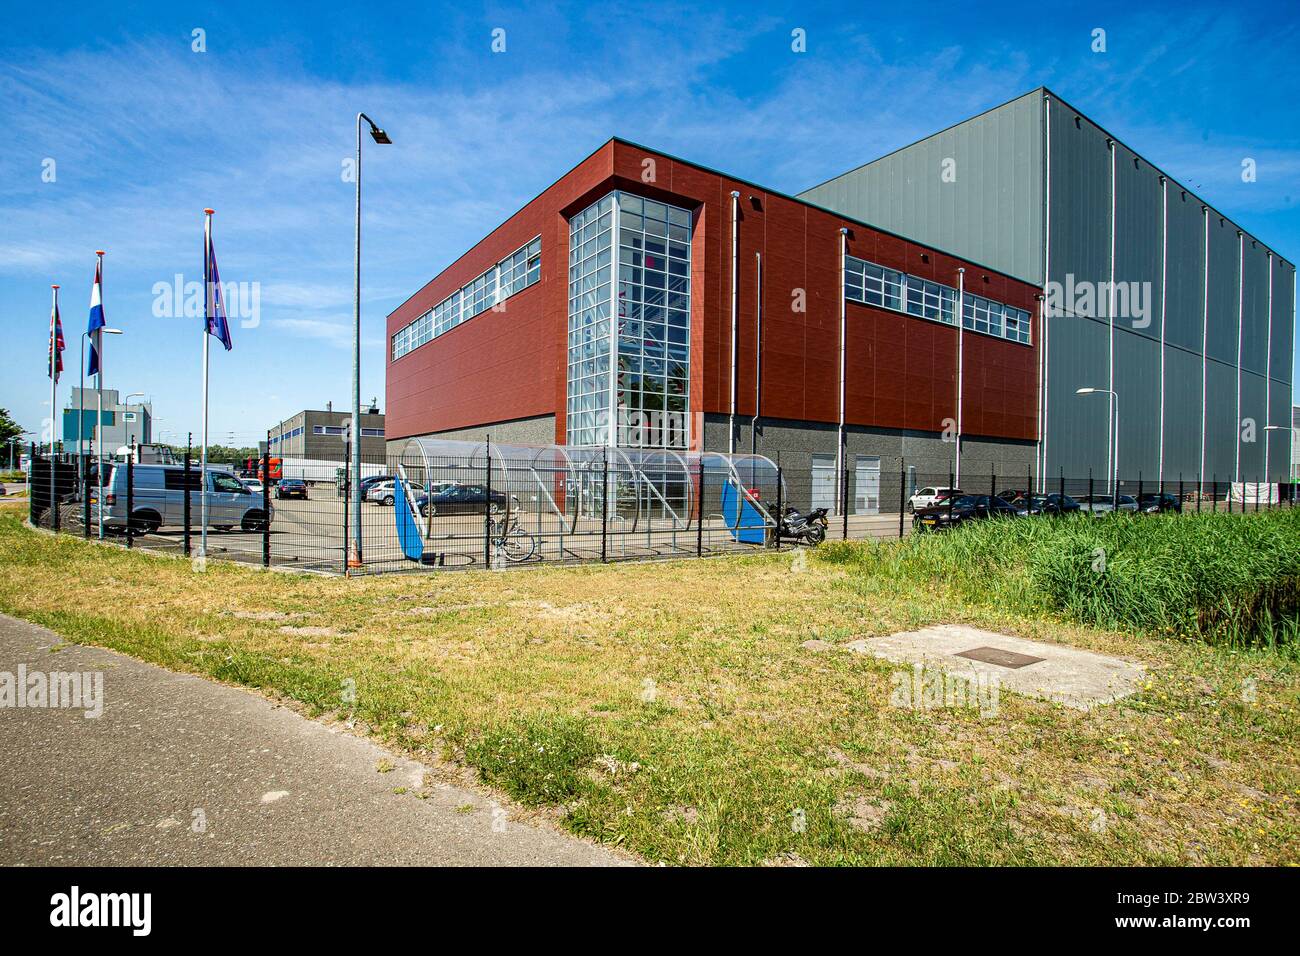 HELMOND, 29-05-2020, Van Rooi Meat B.V., Covid-19 possibly found near Van  Rooi Meat processor. Exterior photos of Van Rooi Meat Stock Photo - Alamy